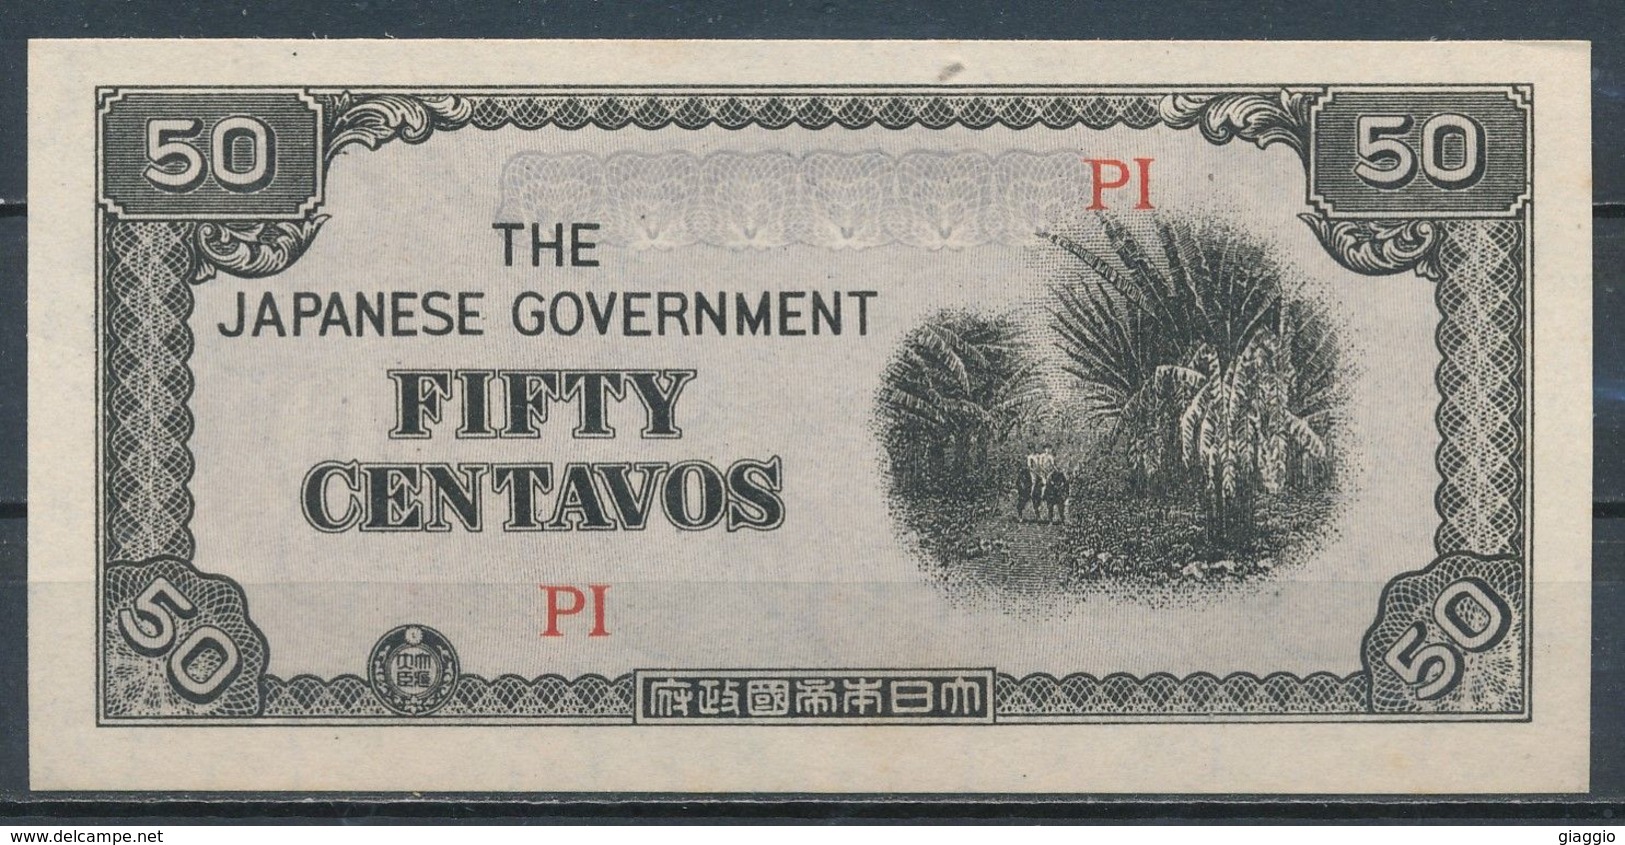 °°° JAPAN - JAPANESE GOVERNMENT 50 FIFTY CENTAVOS °°° - Japon